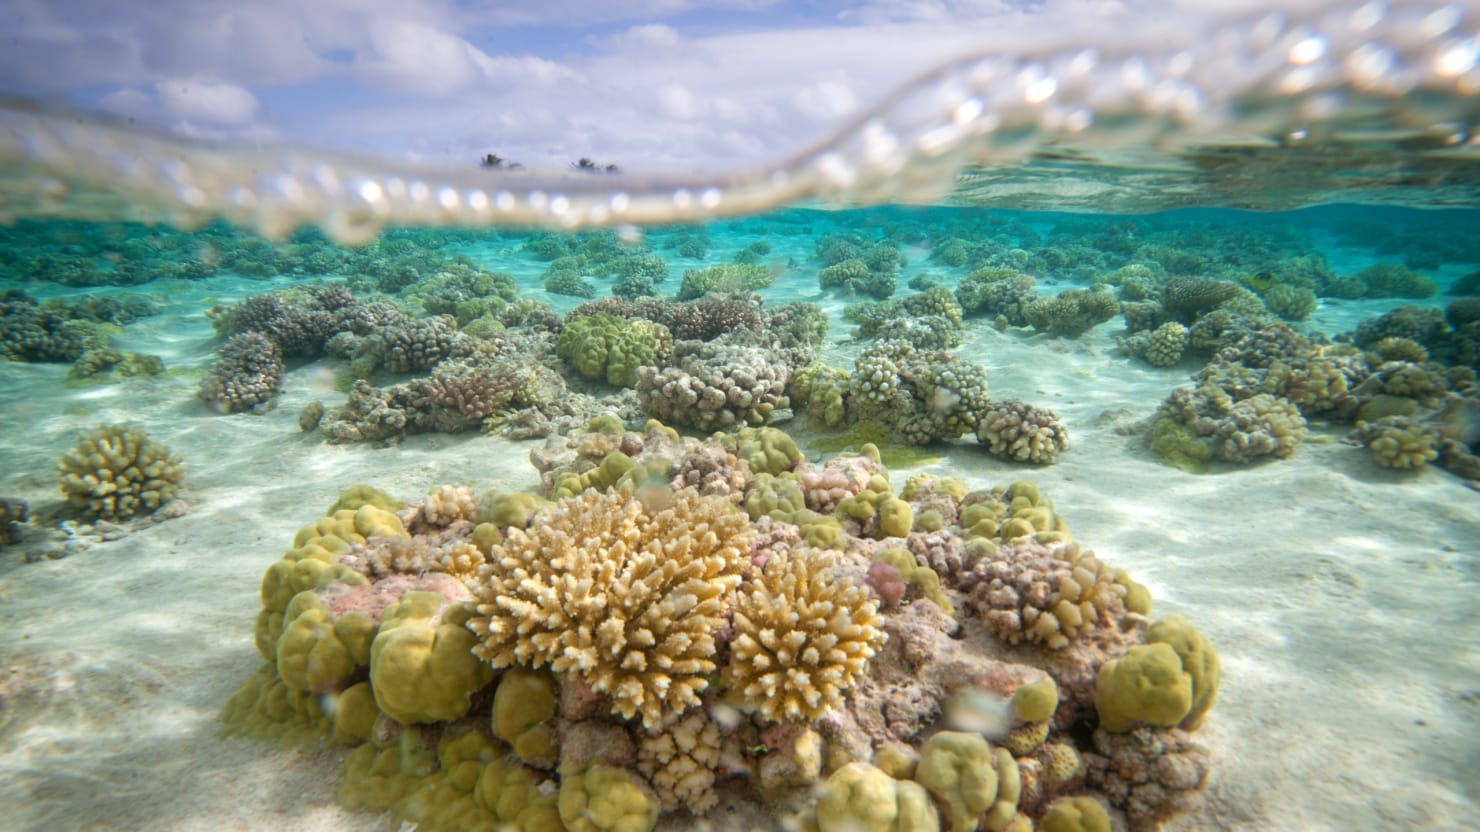 First images of unique Brazilian coral reef at mouth of , Coral